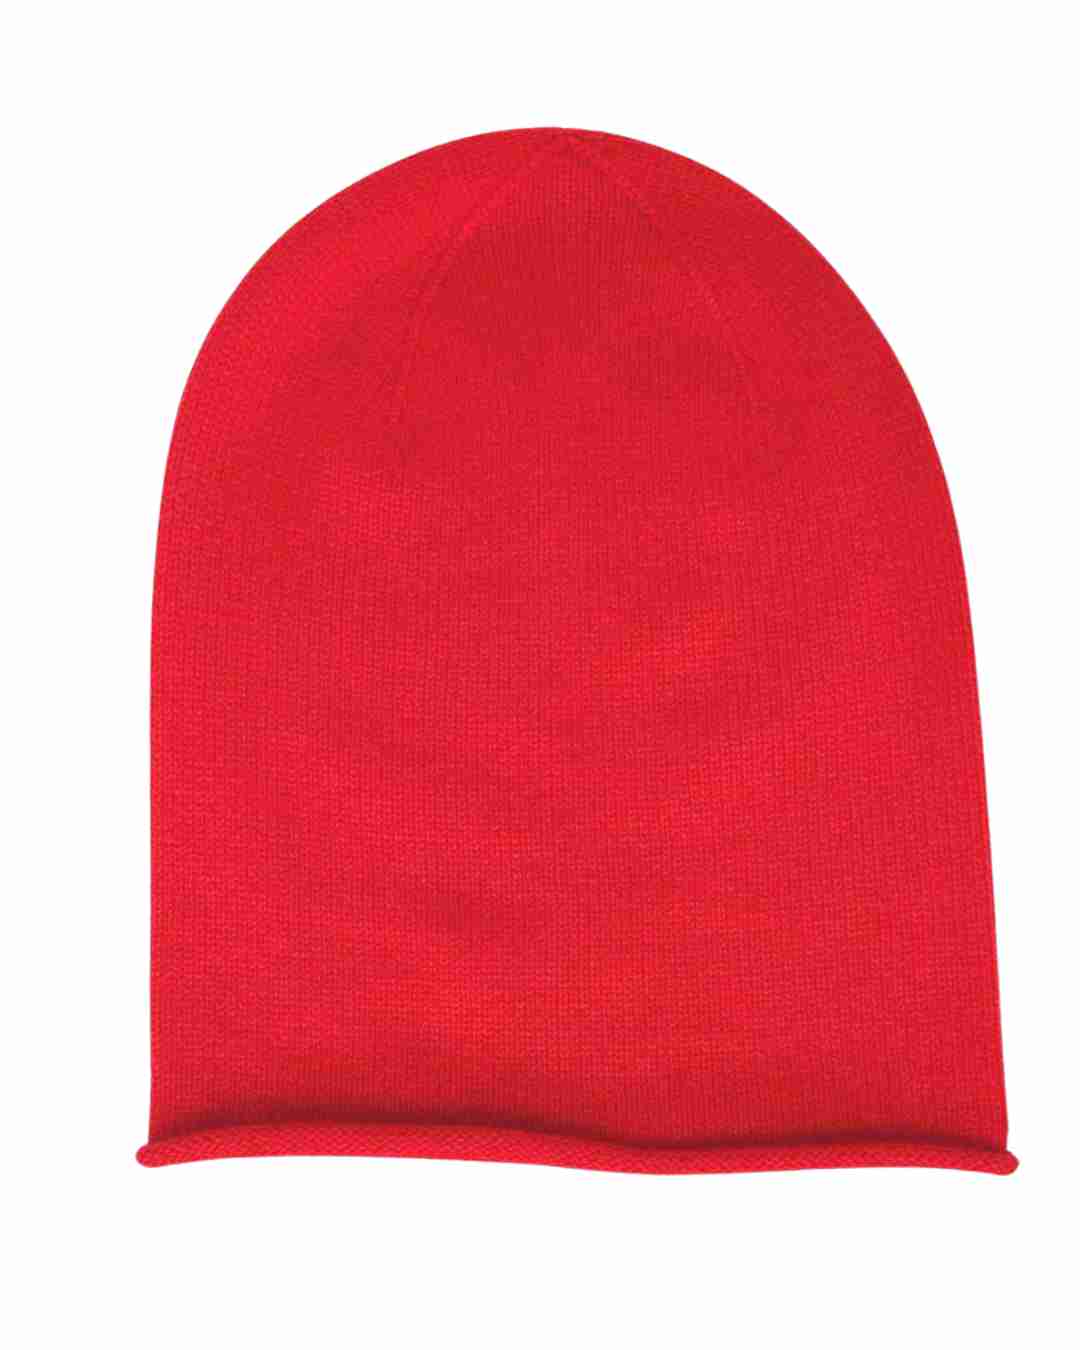 red cashmere hat from Ireland and so soft